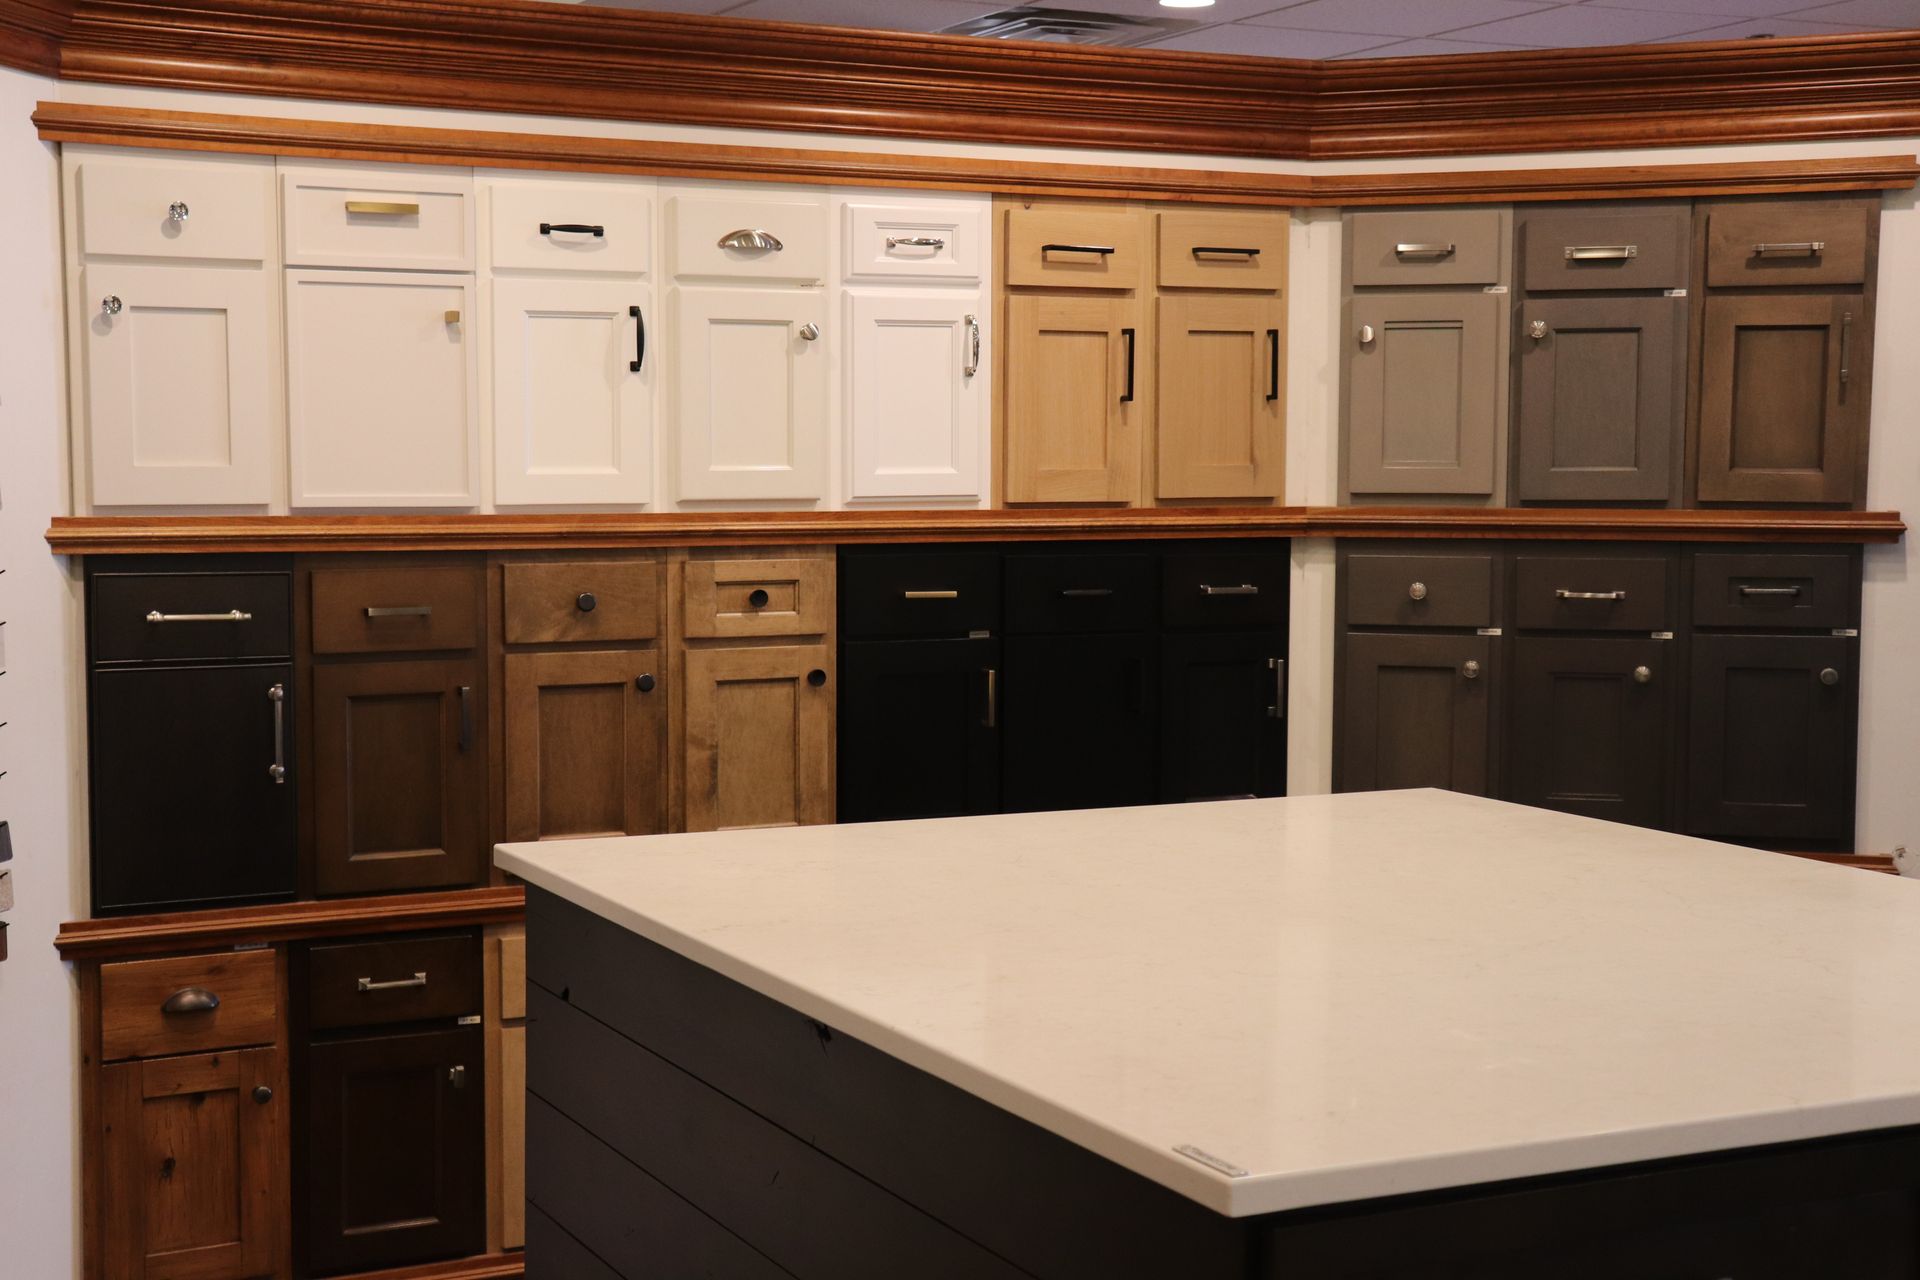 A kitchen with a lot of cabinets and drawers